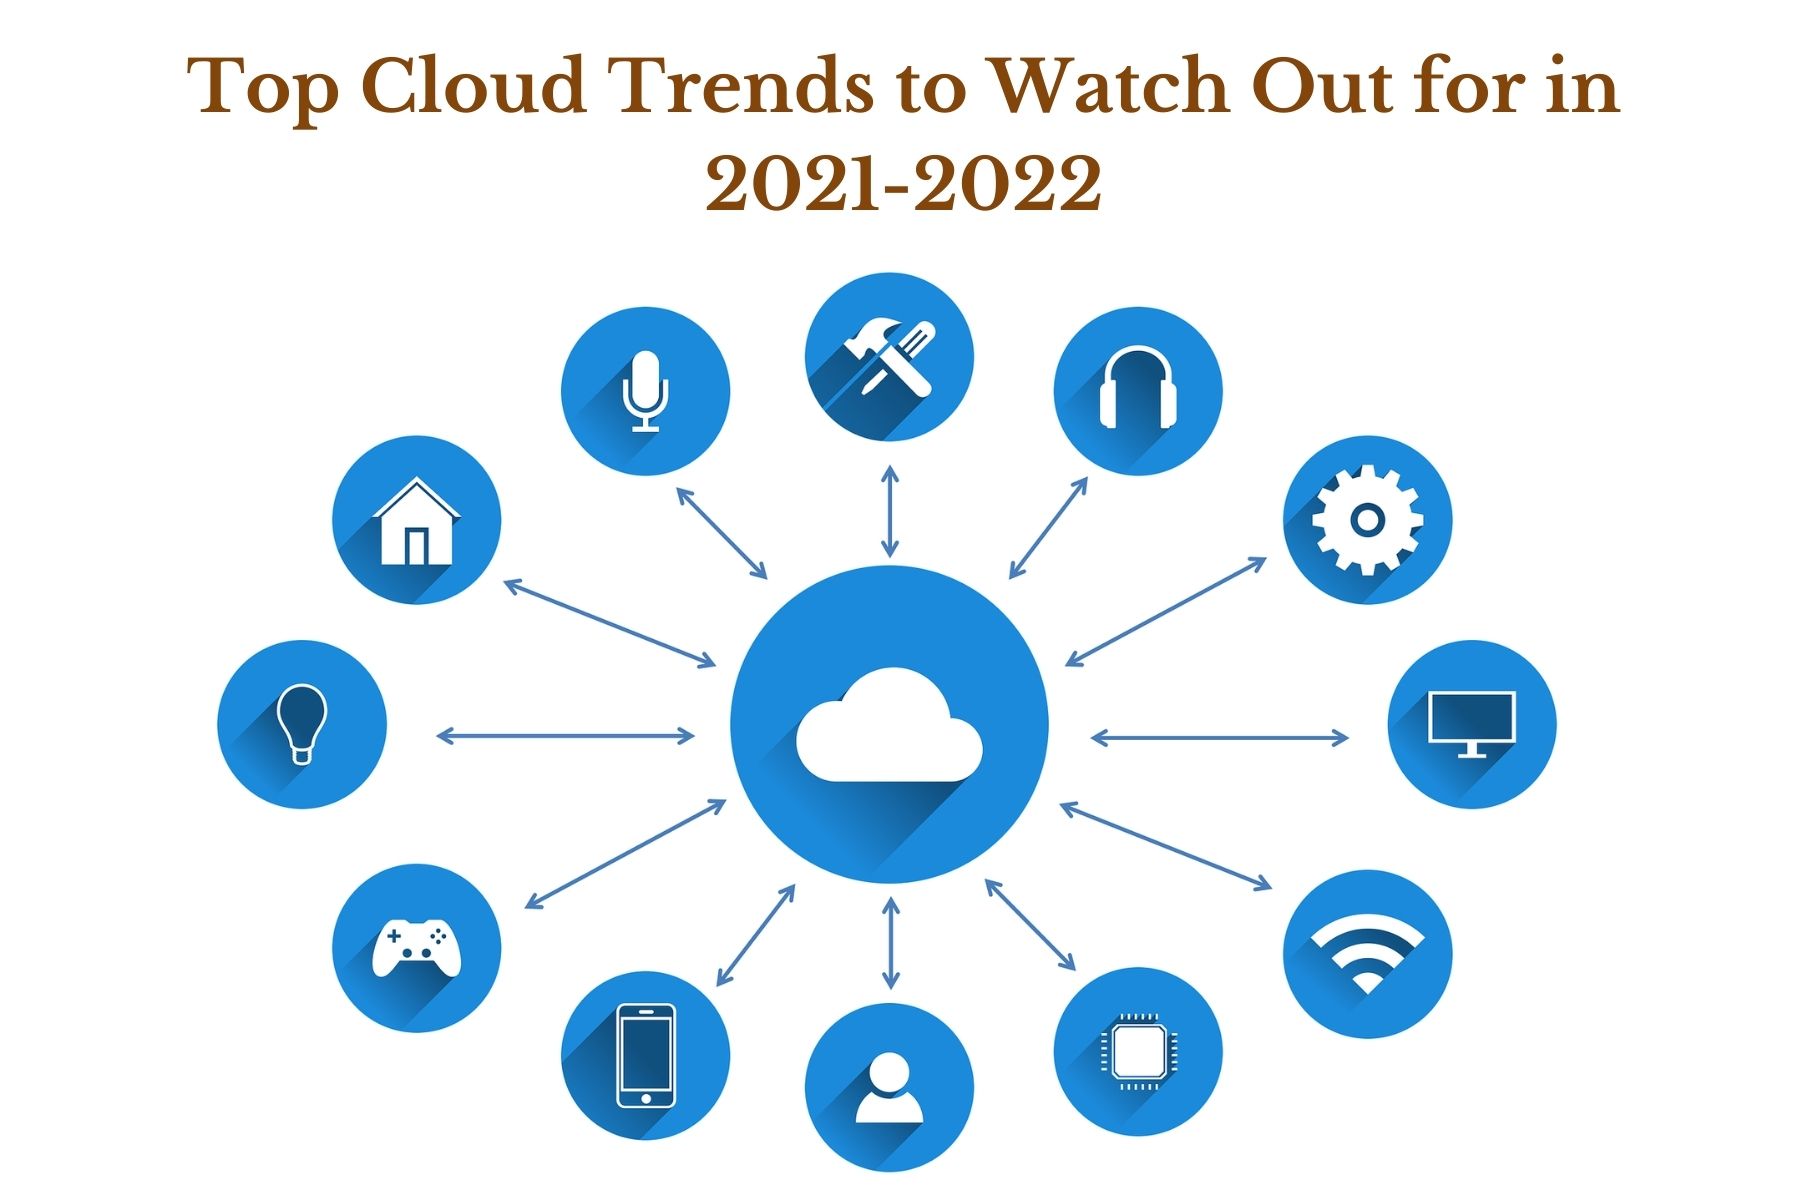 Top Cloud Trends to Watch Out for in 2021-2022